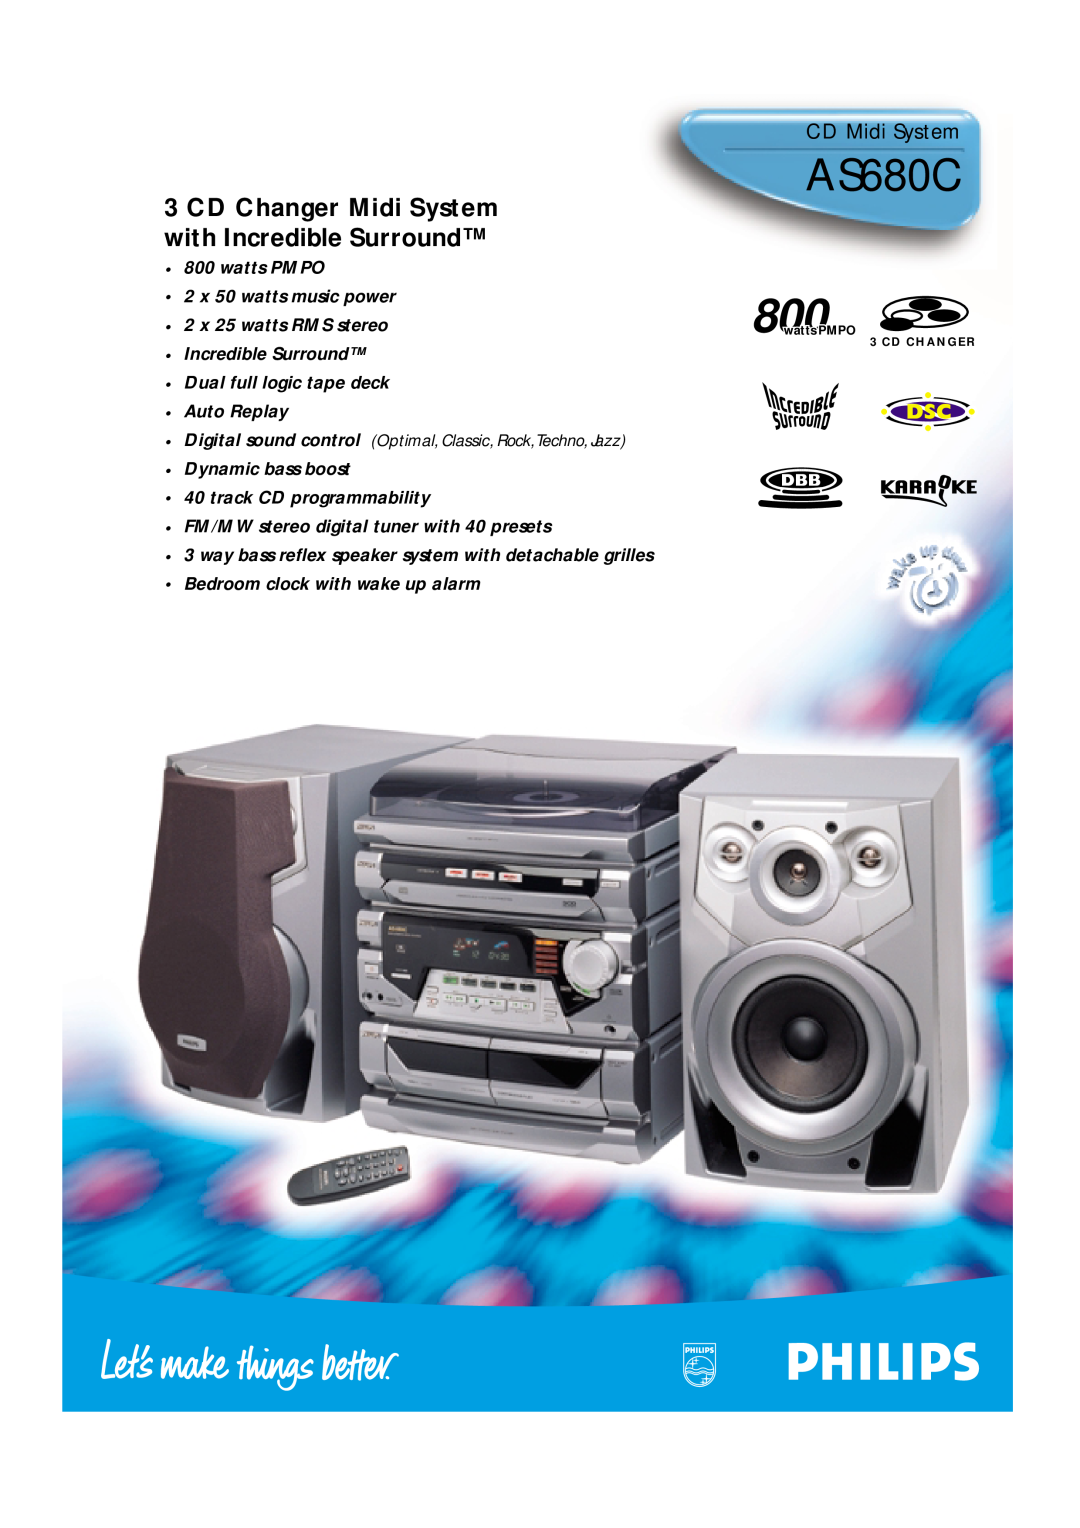 Philips AS680C manual CD Midi System, CD Changer Midi System with Incredible Surround 